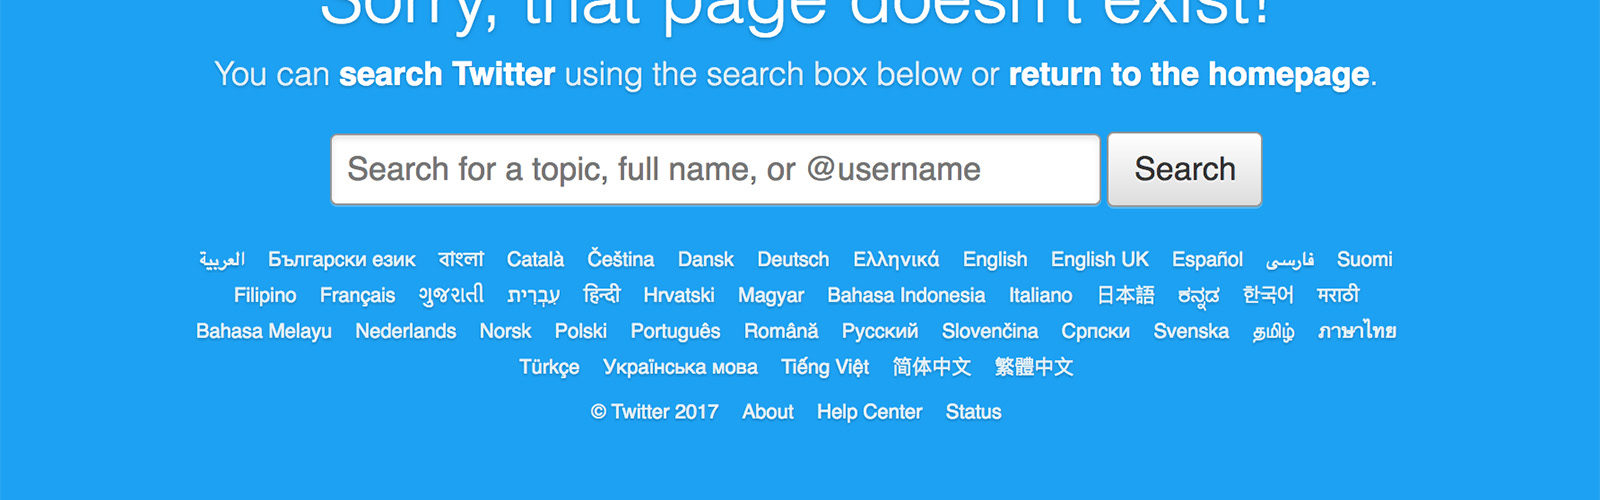 twitter-does-not-exist-1600×500